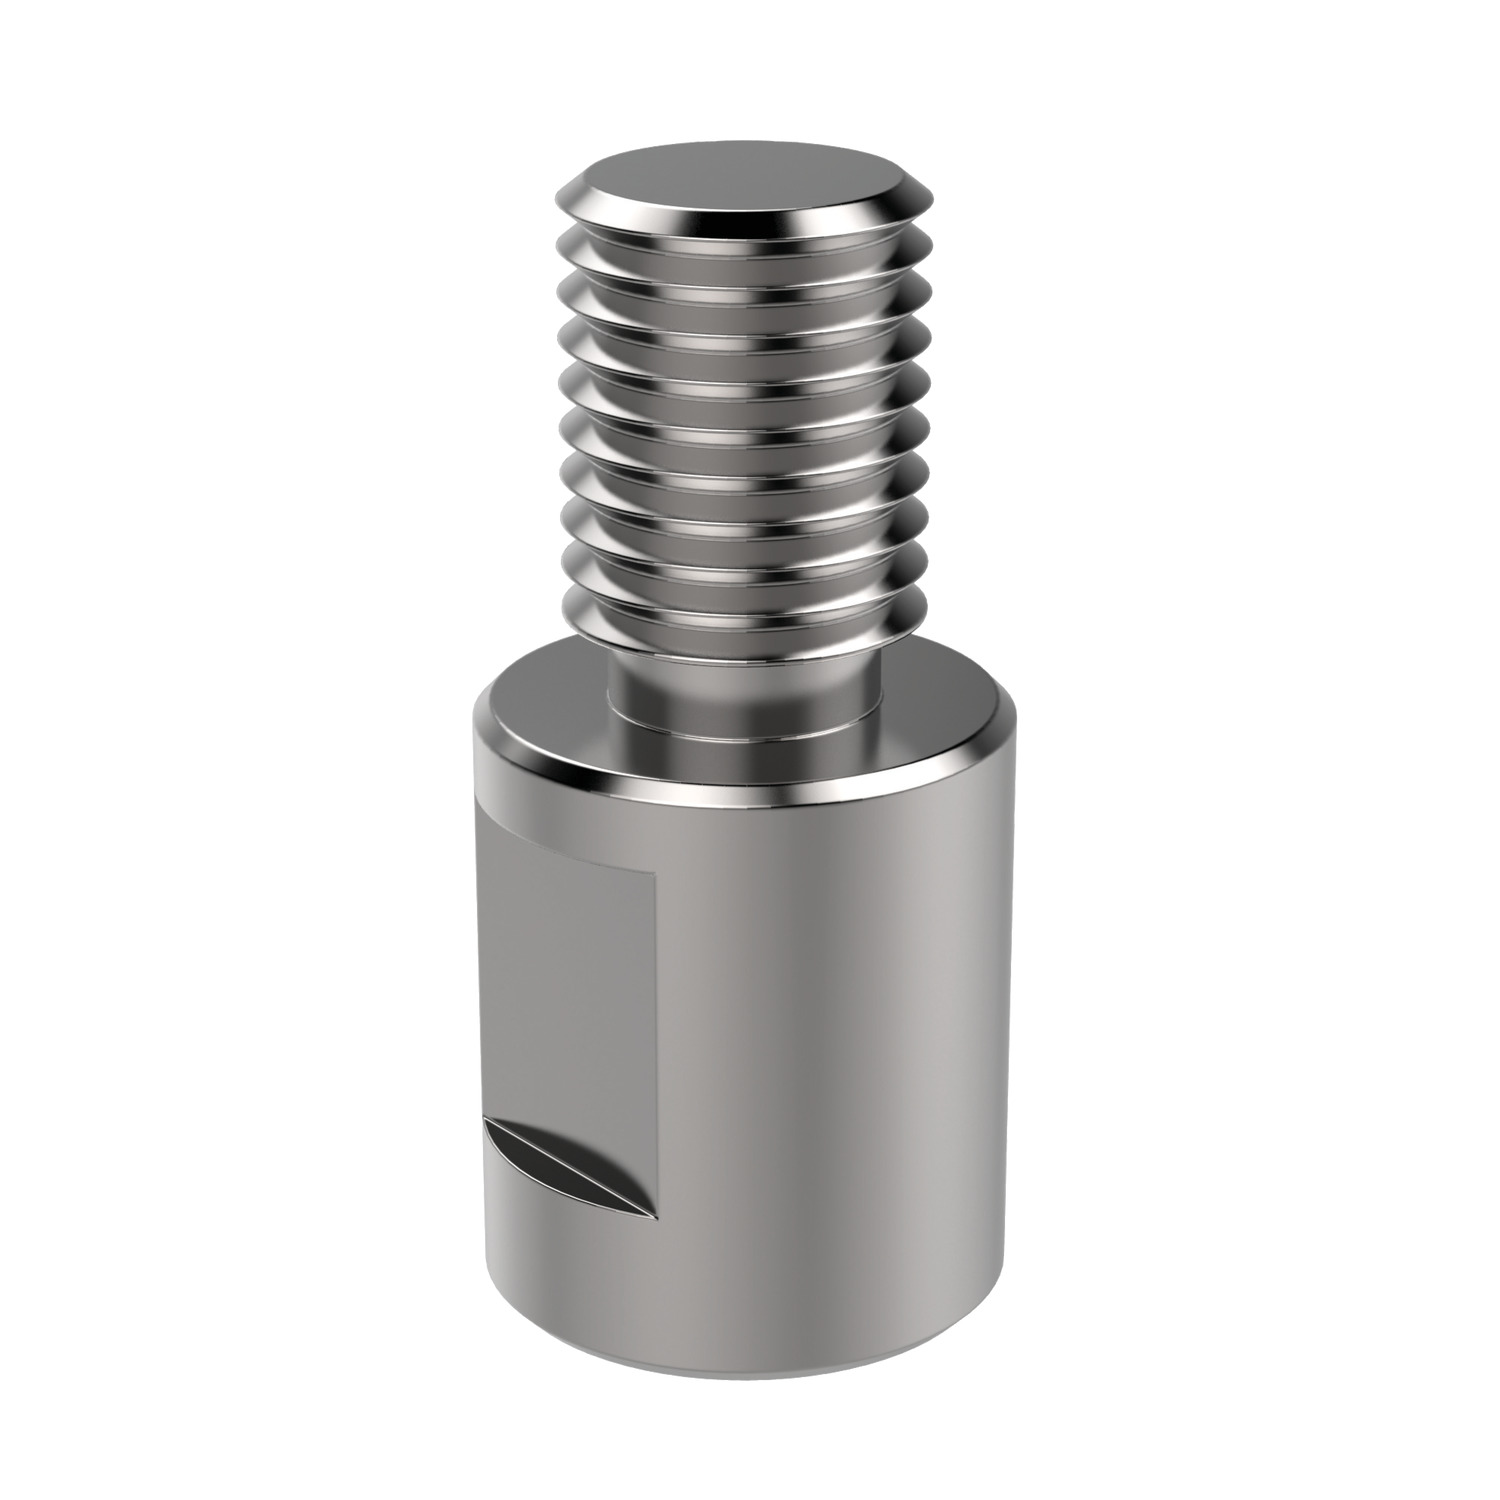 One-Touch Fastener - Magnetic Hold Magnetic holds designed for use in conjunction with magnetic one-touch fasteners 33956. Provides secure fastening of panels whilst allowing for easy access.